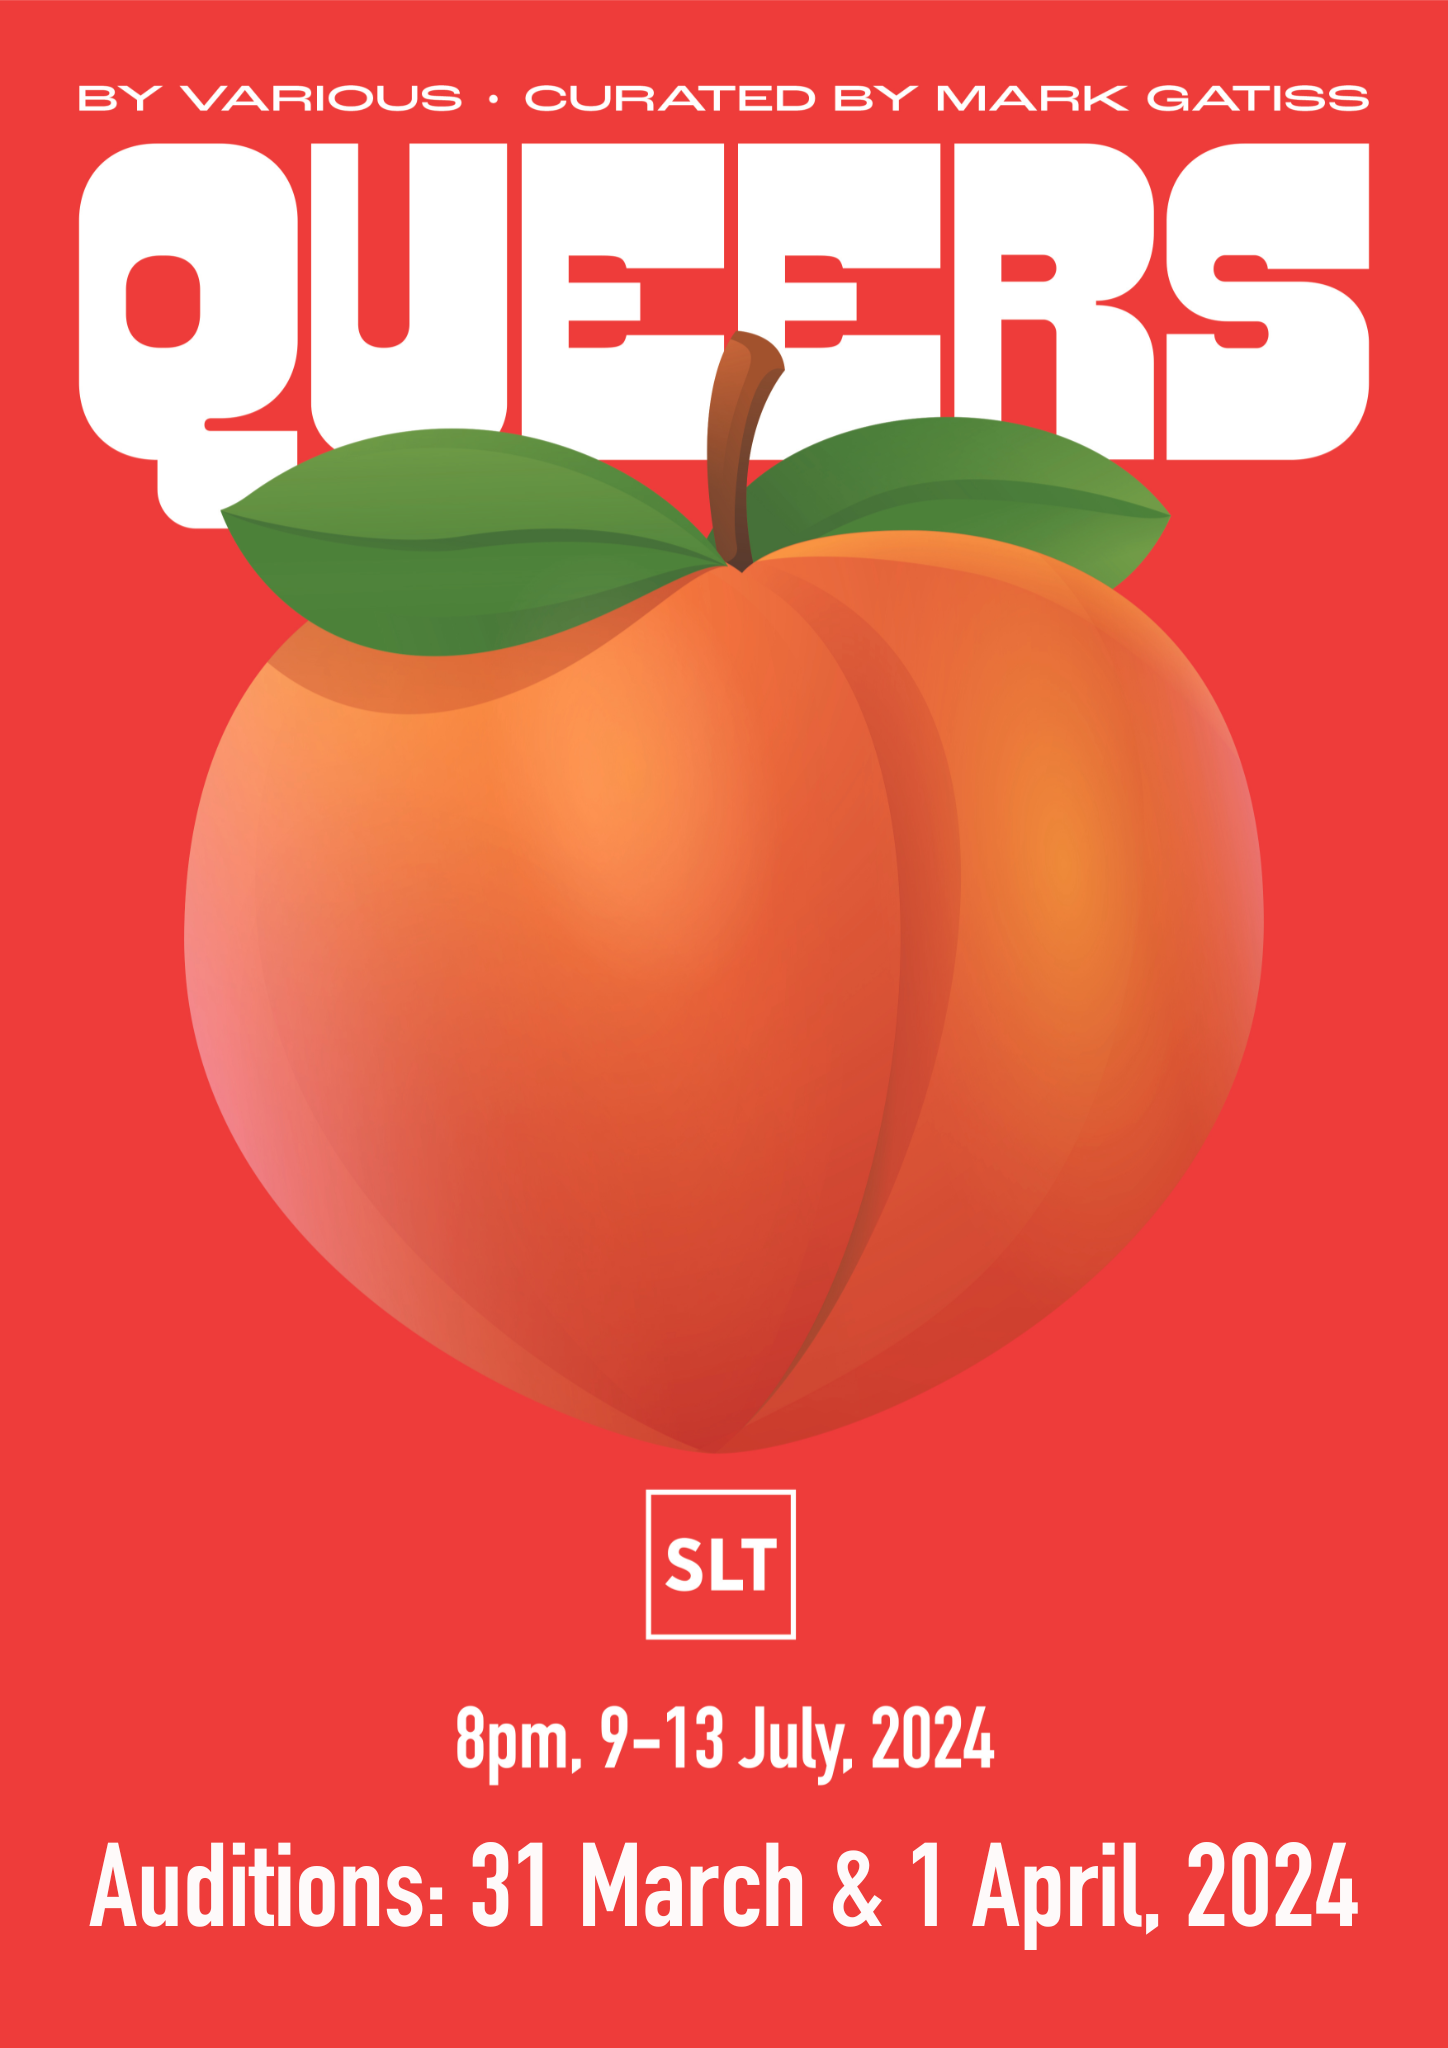 Poster image with large peach on brightly coloured background.